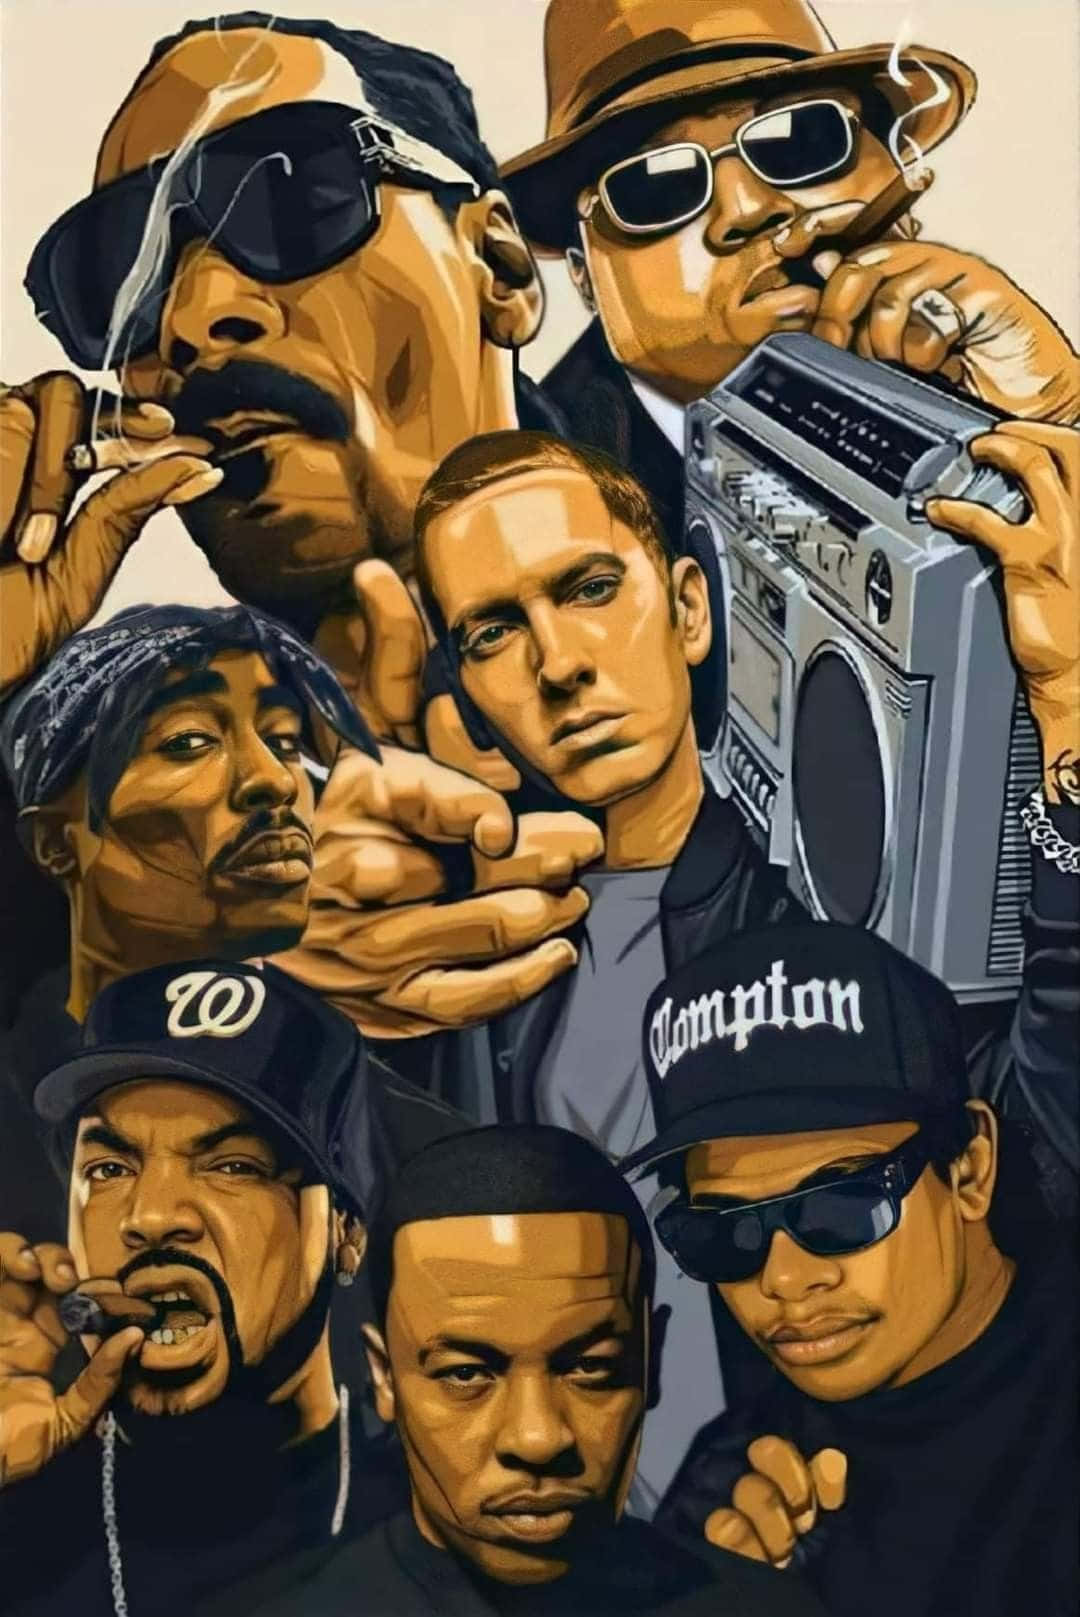 A Group Of People With A Radio And A Boombox Wallpaper